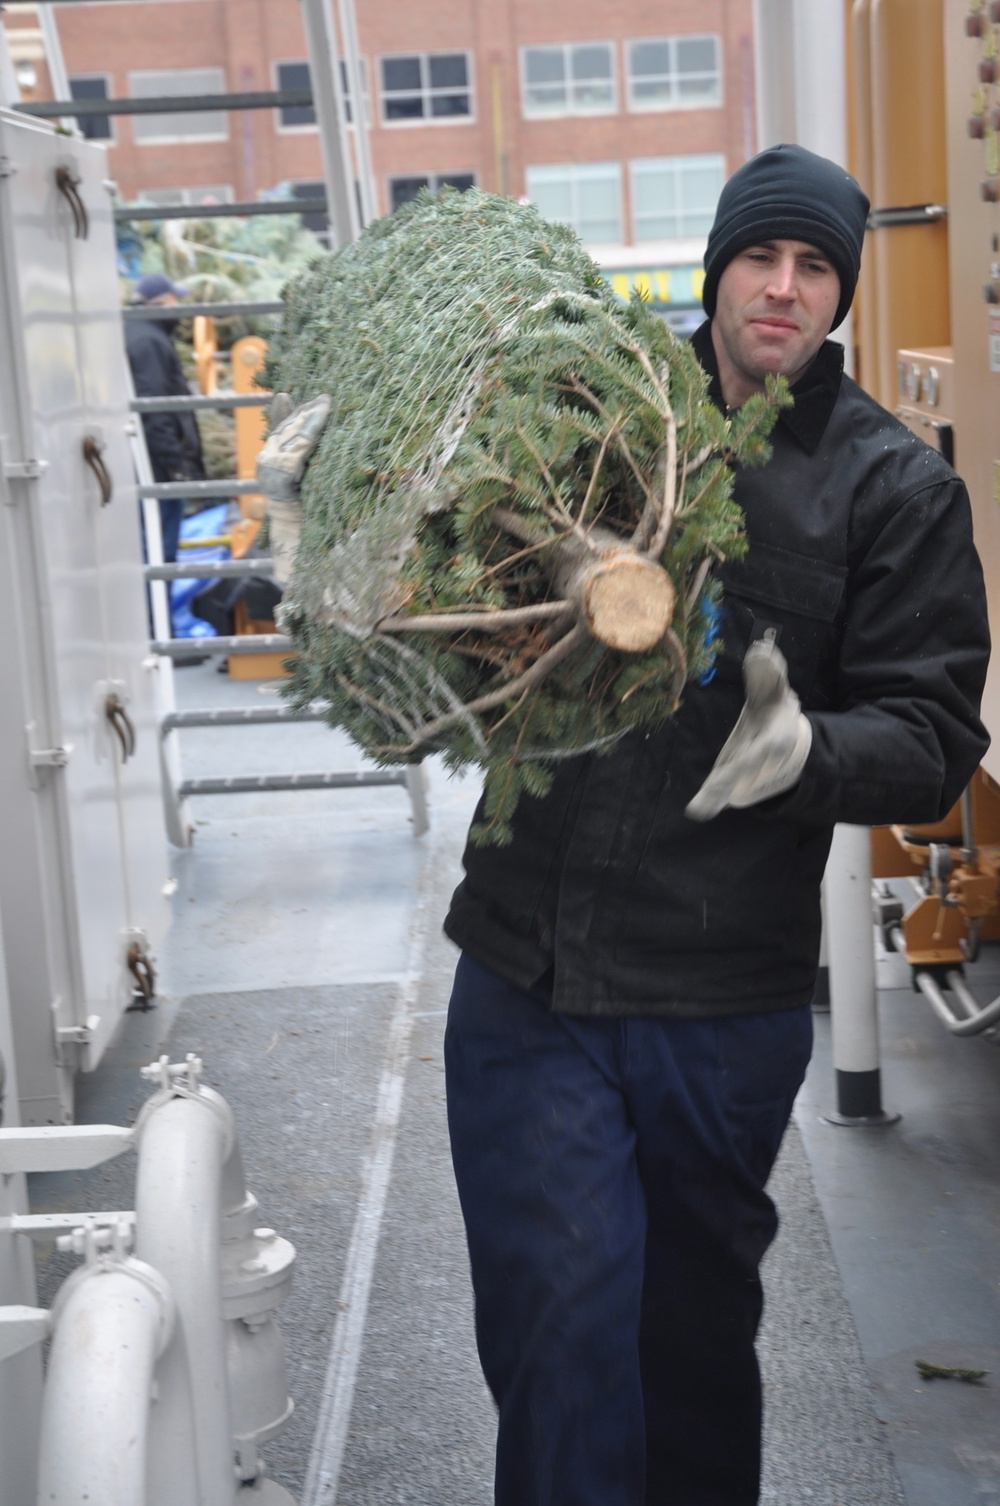 Coast Guard Cutter Mackinaw arrives in Chicago with 1,200 Christmas trees